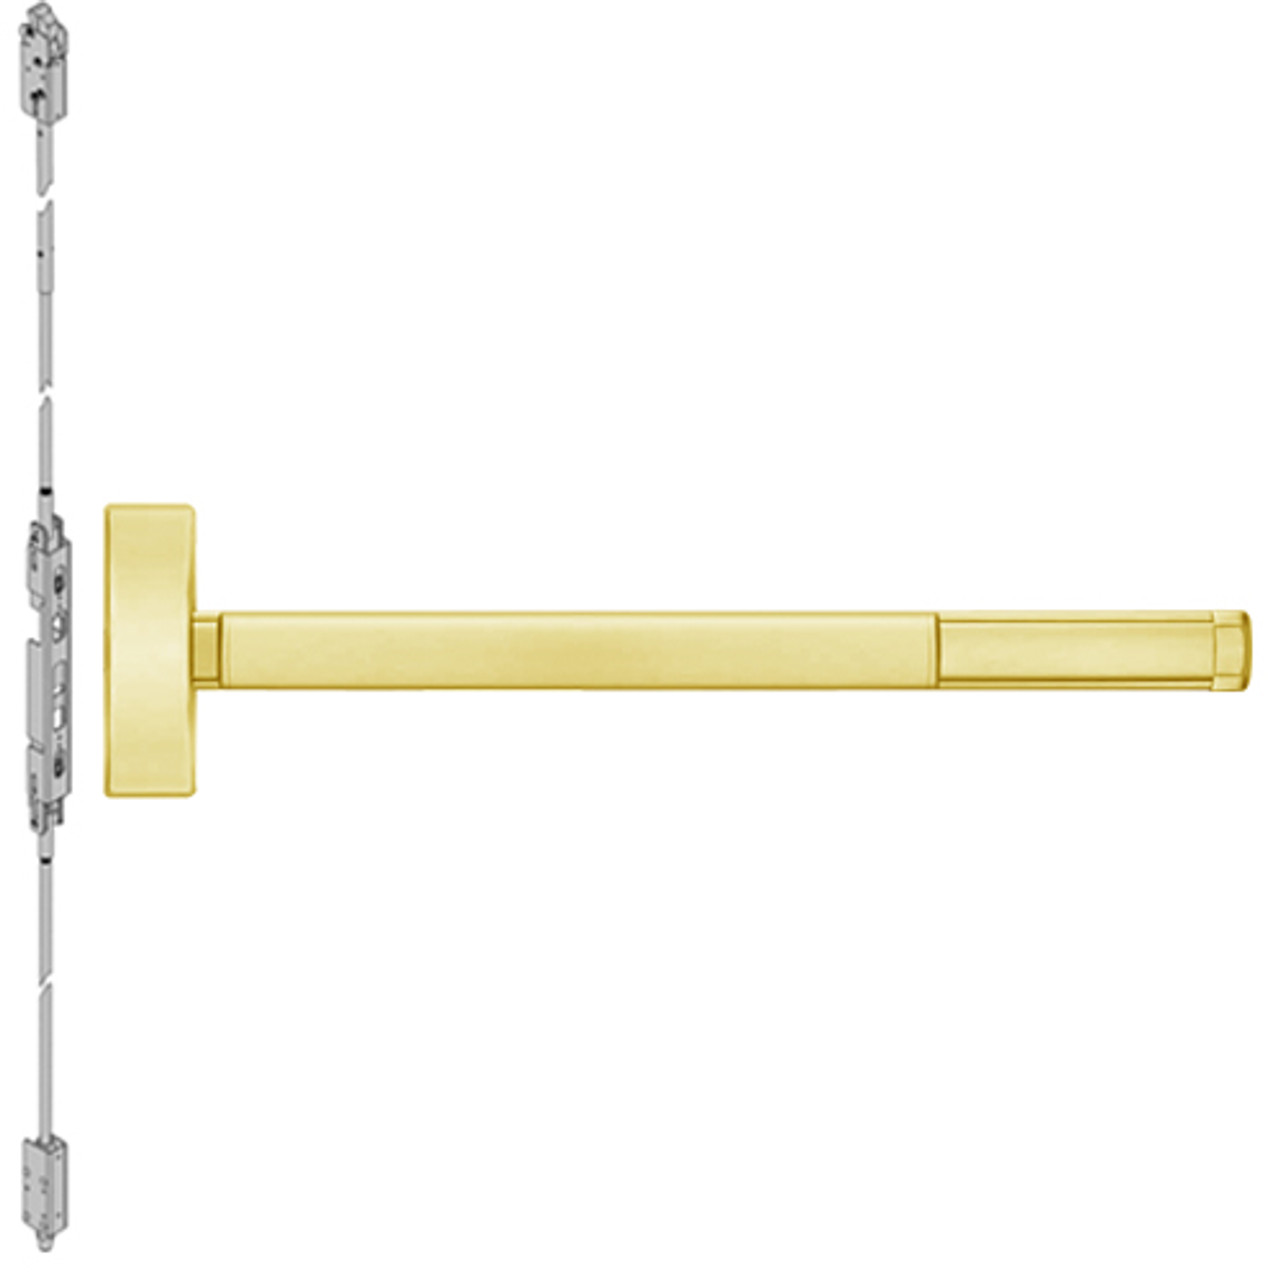 2802LBRCD-605-36 PHI 2800 Series Non Fire Rated Concealed Vertical Rod Exit Device Prepped for Dummy Trim in Bright Brass Finish